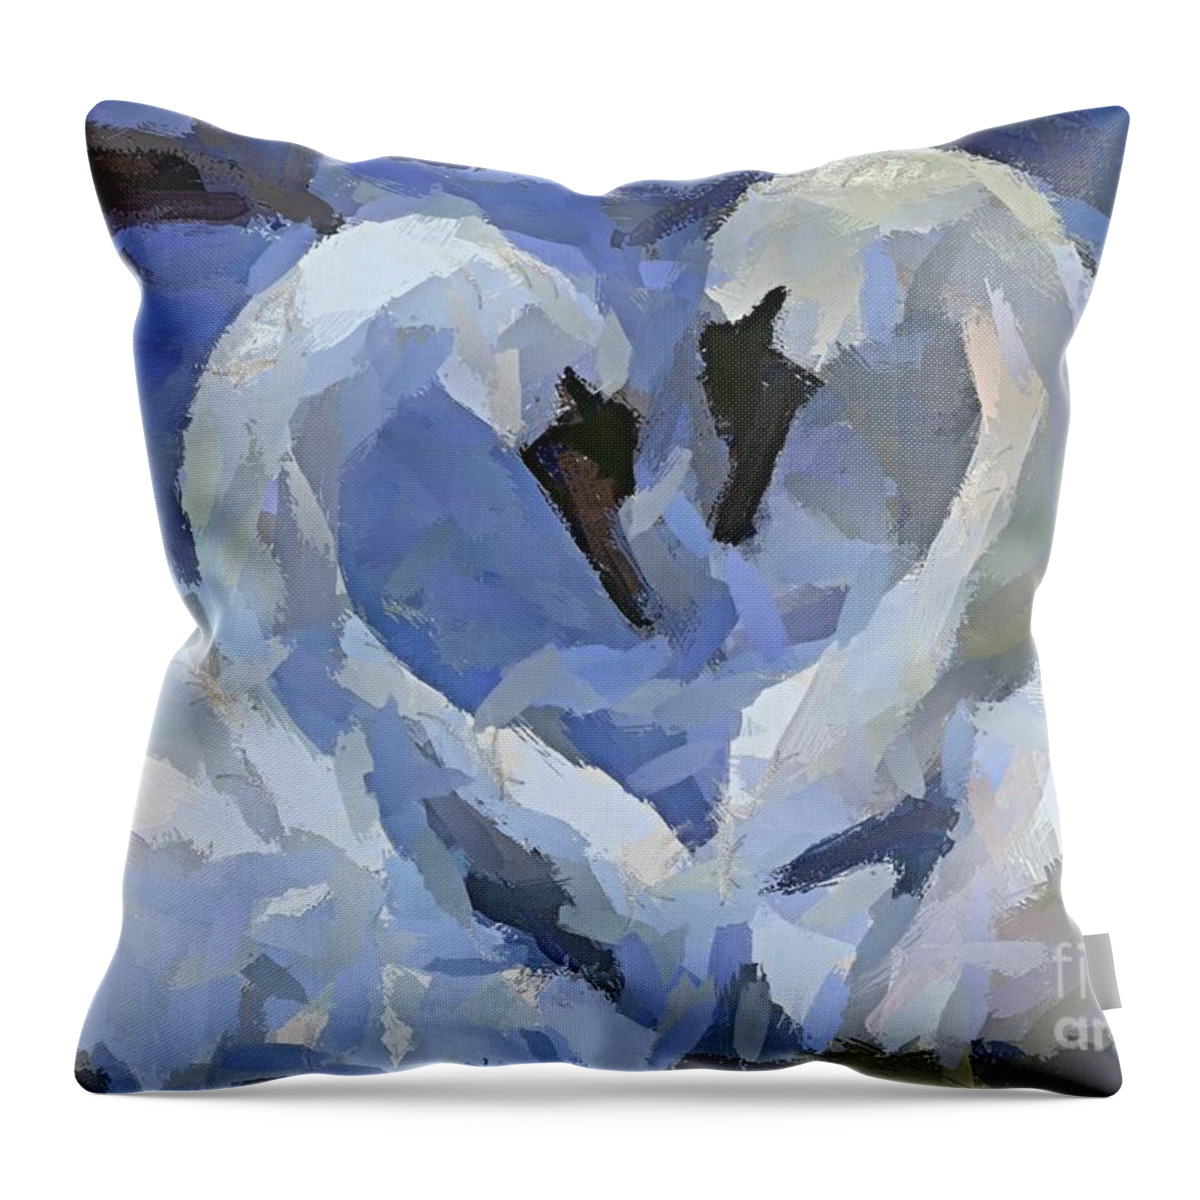 Expression Throw Pillow featuring the painting Love In Blue by Dragica Micki Fortuna